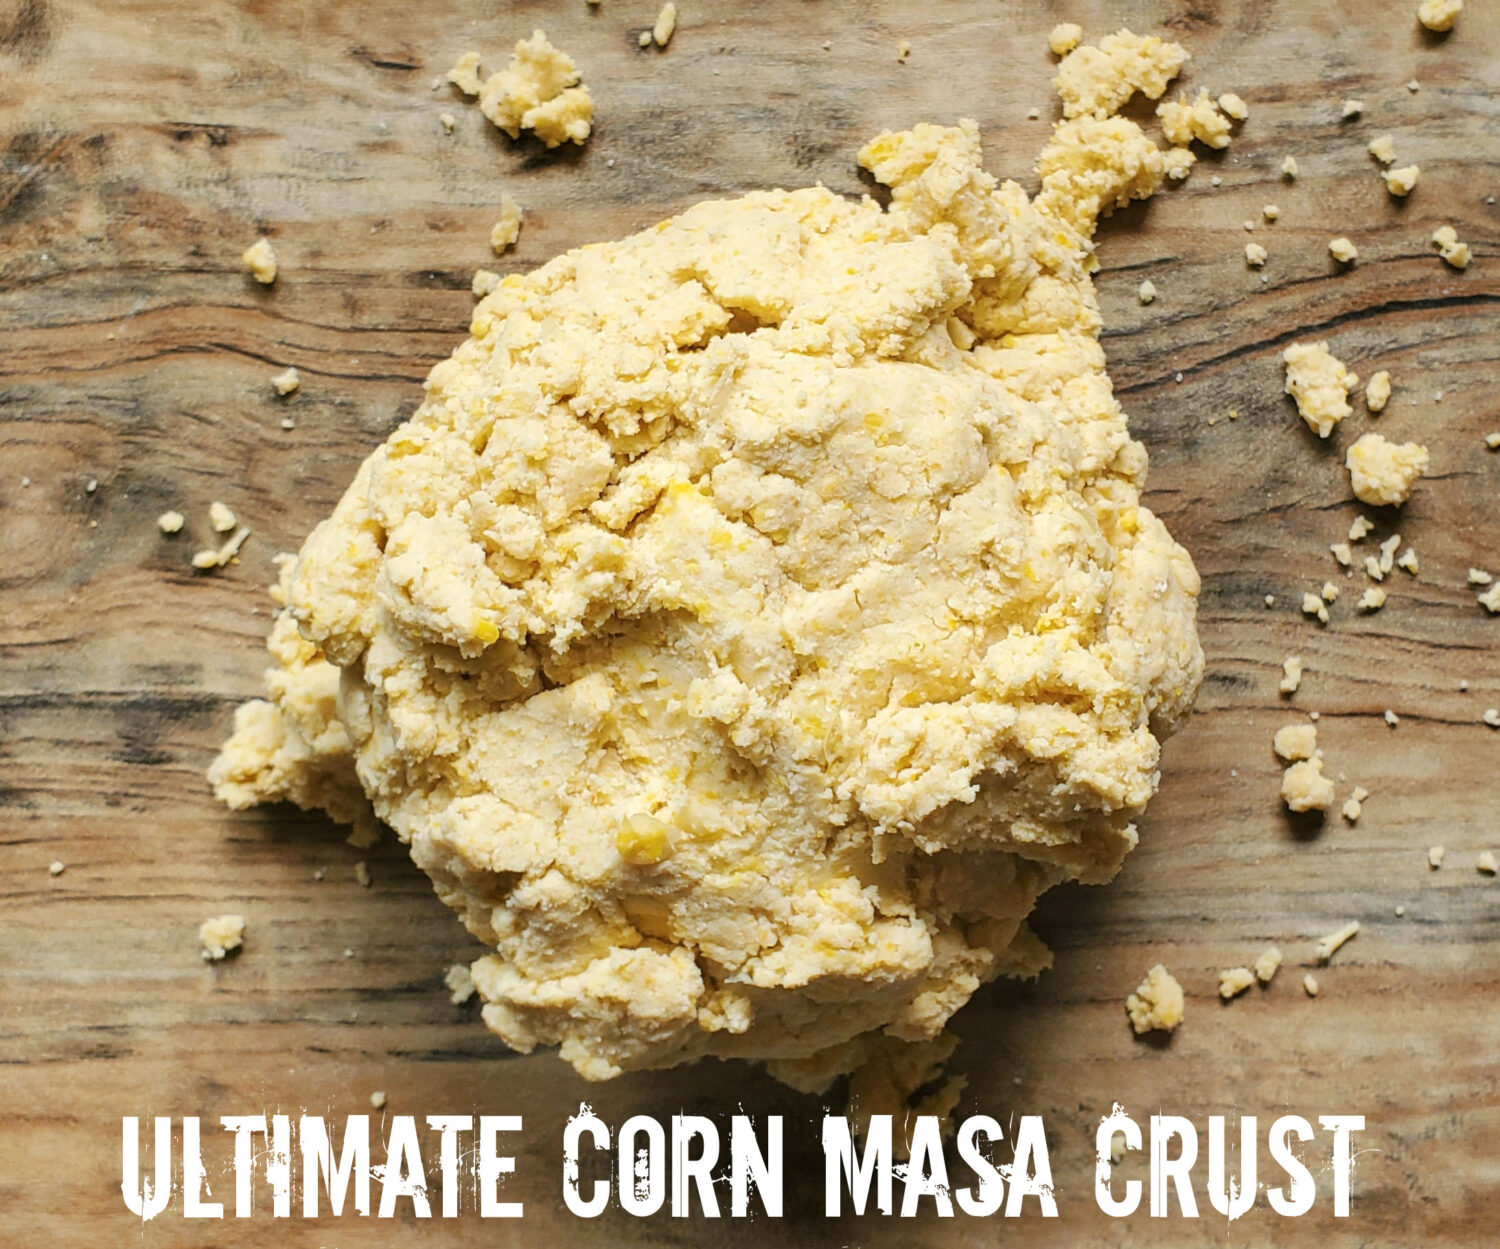 Ultimate corn masa crust is tender, flakey, with butter, corn masa, flour, and cornmeal with pureed corn holding all the goodness together!